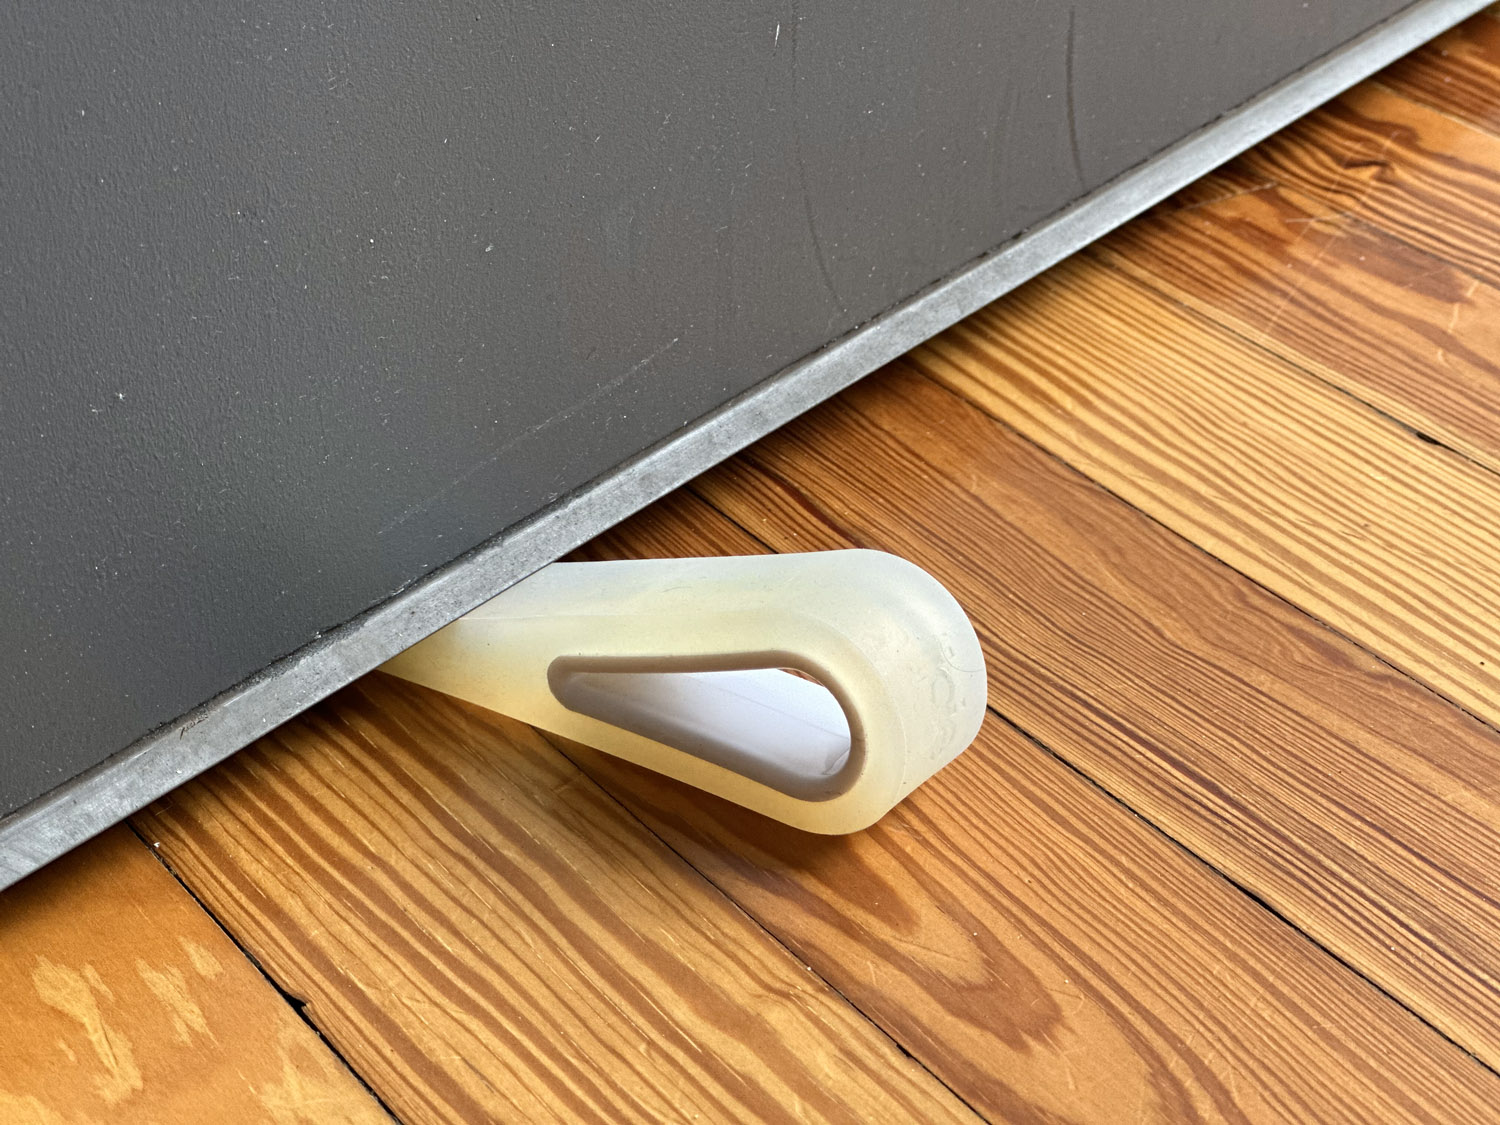 A doorstop is an unexpected tool for professional photographers!